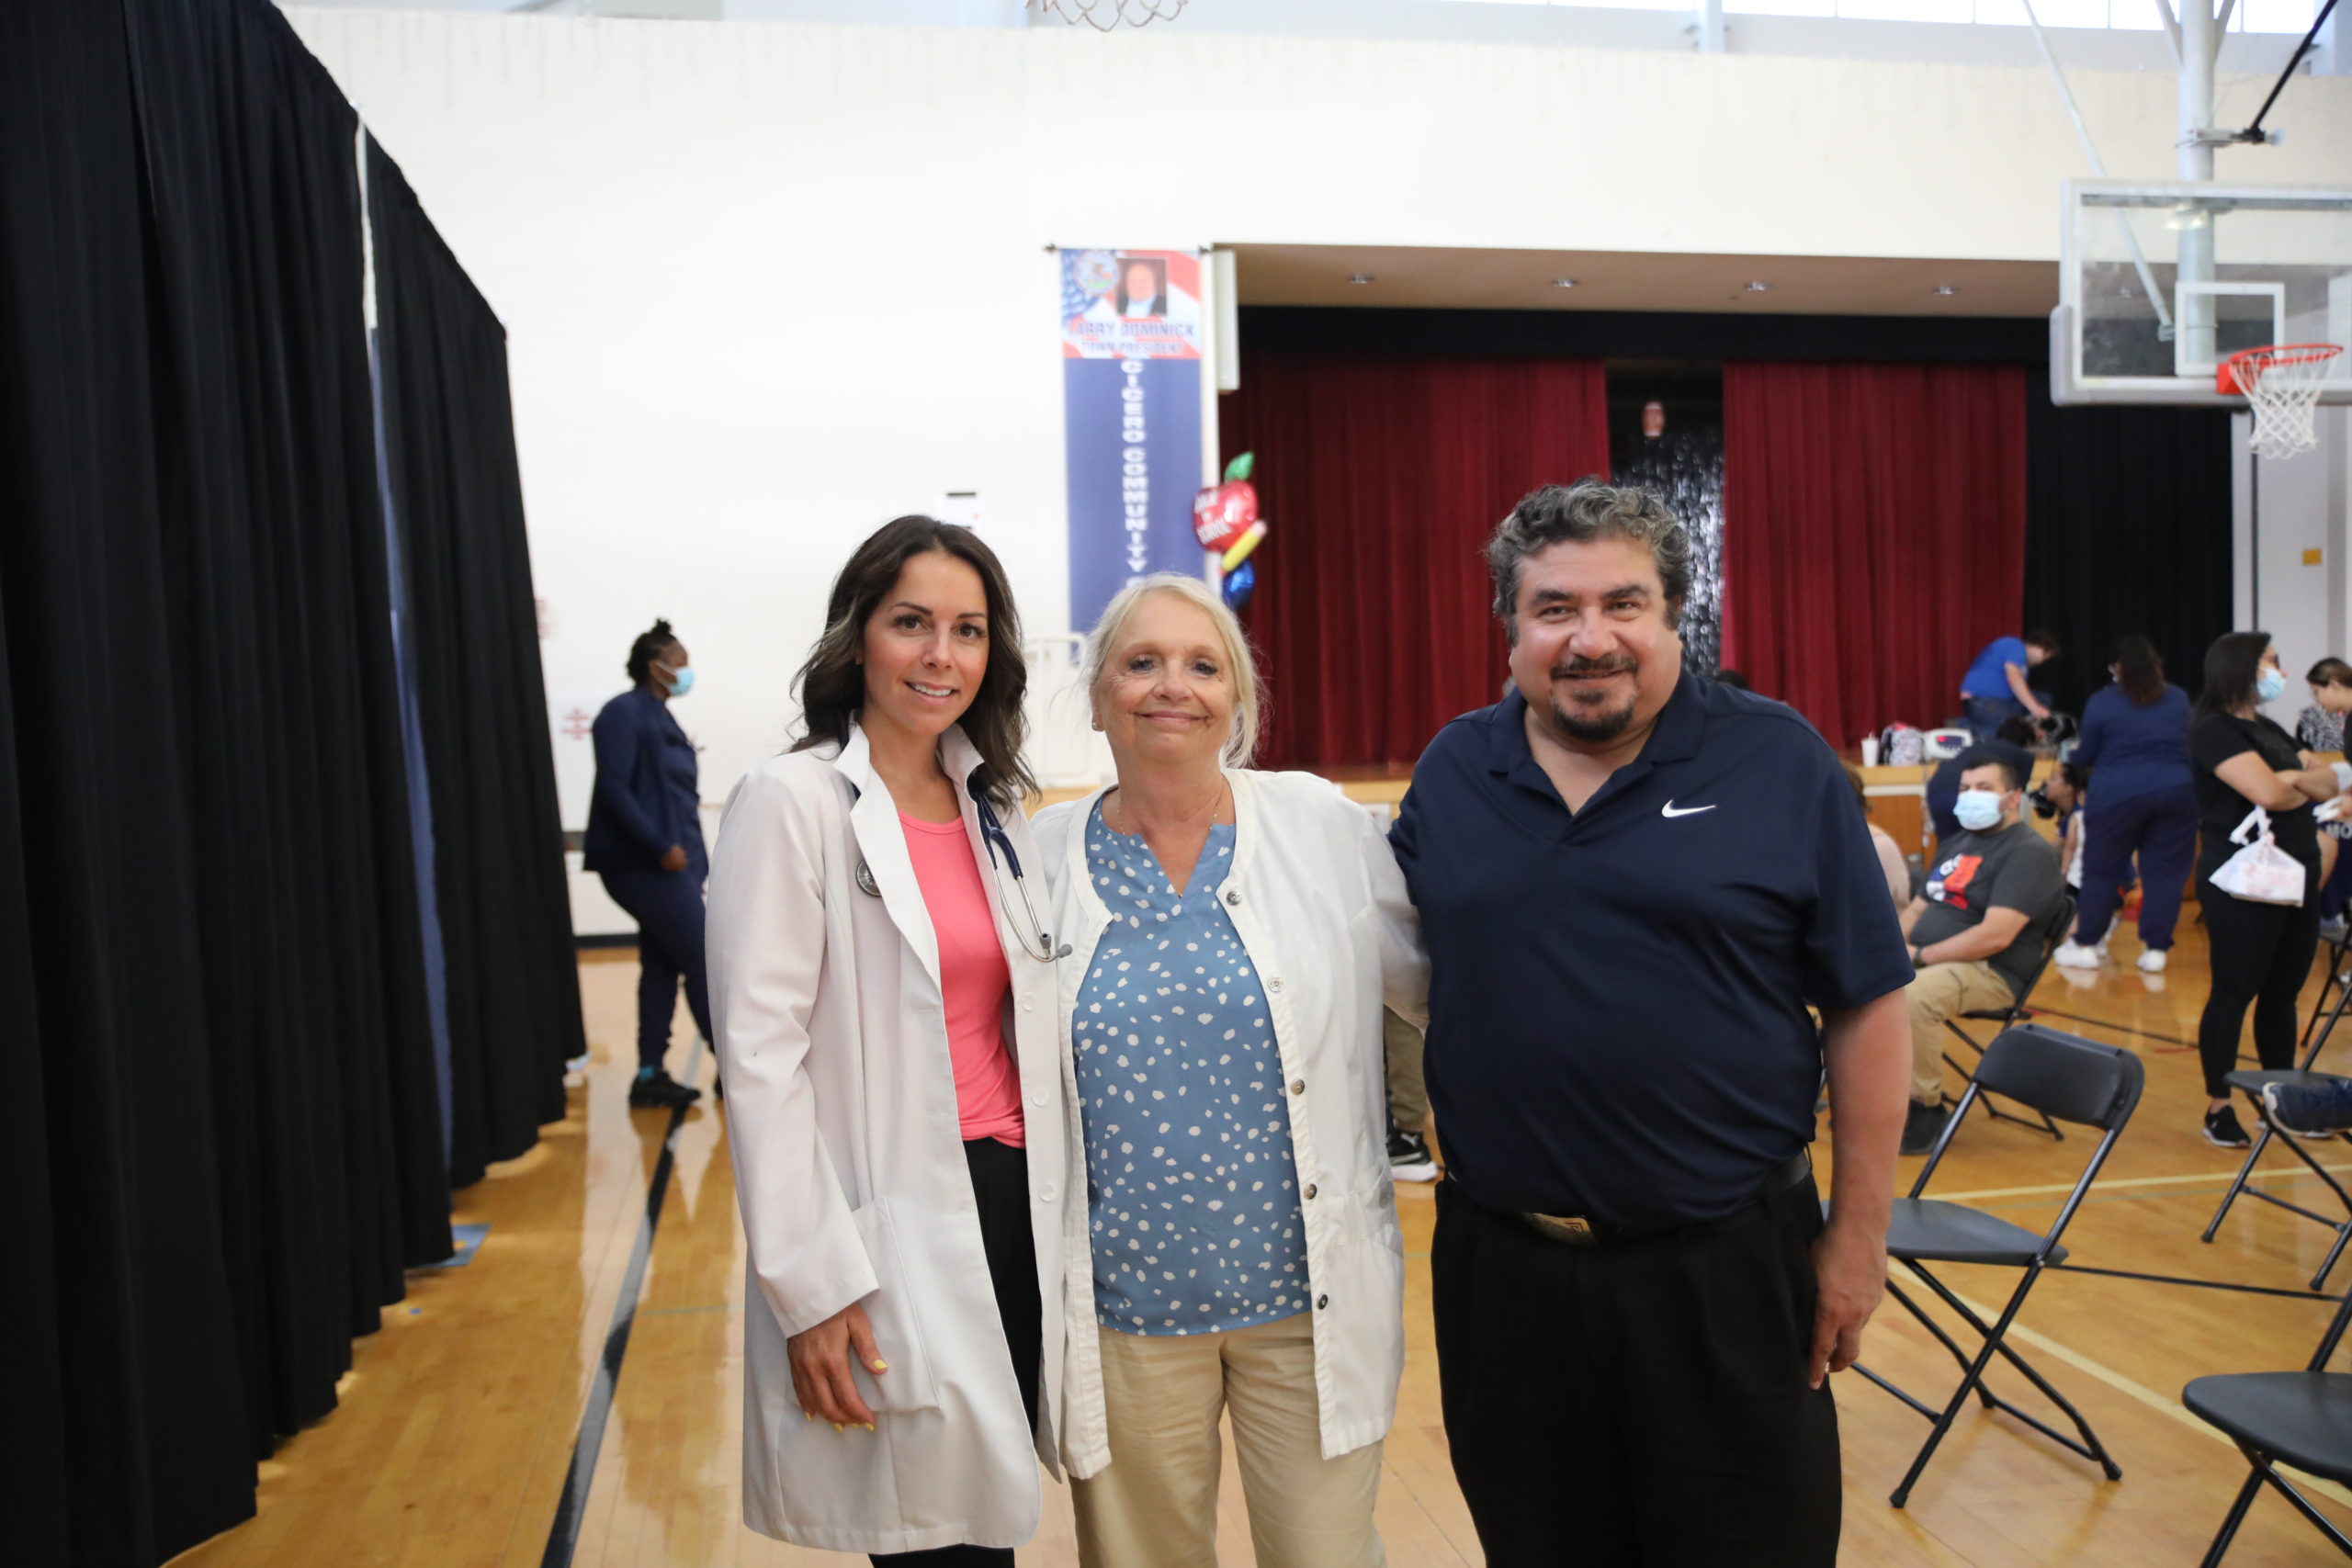 Town President Larry Dominick and the Town of Cicero Board of Trustees and the Cicero Health Department Director Sue Grazzini and her staff hosted a “Back to School” & Health Fair on Wednesday July 20 for students, families and Seniors at the Cicero Community Center., 2250 S. 49th Ave.